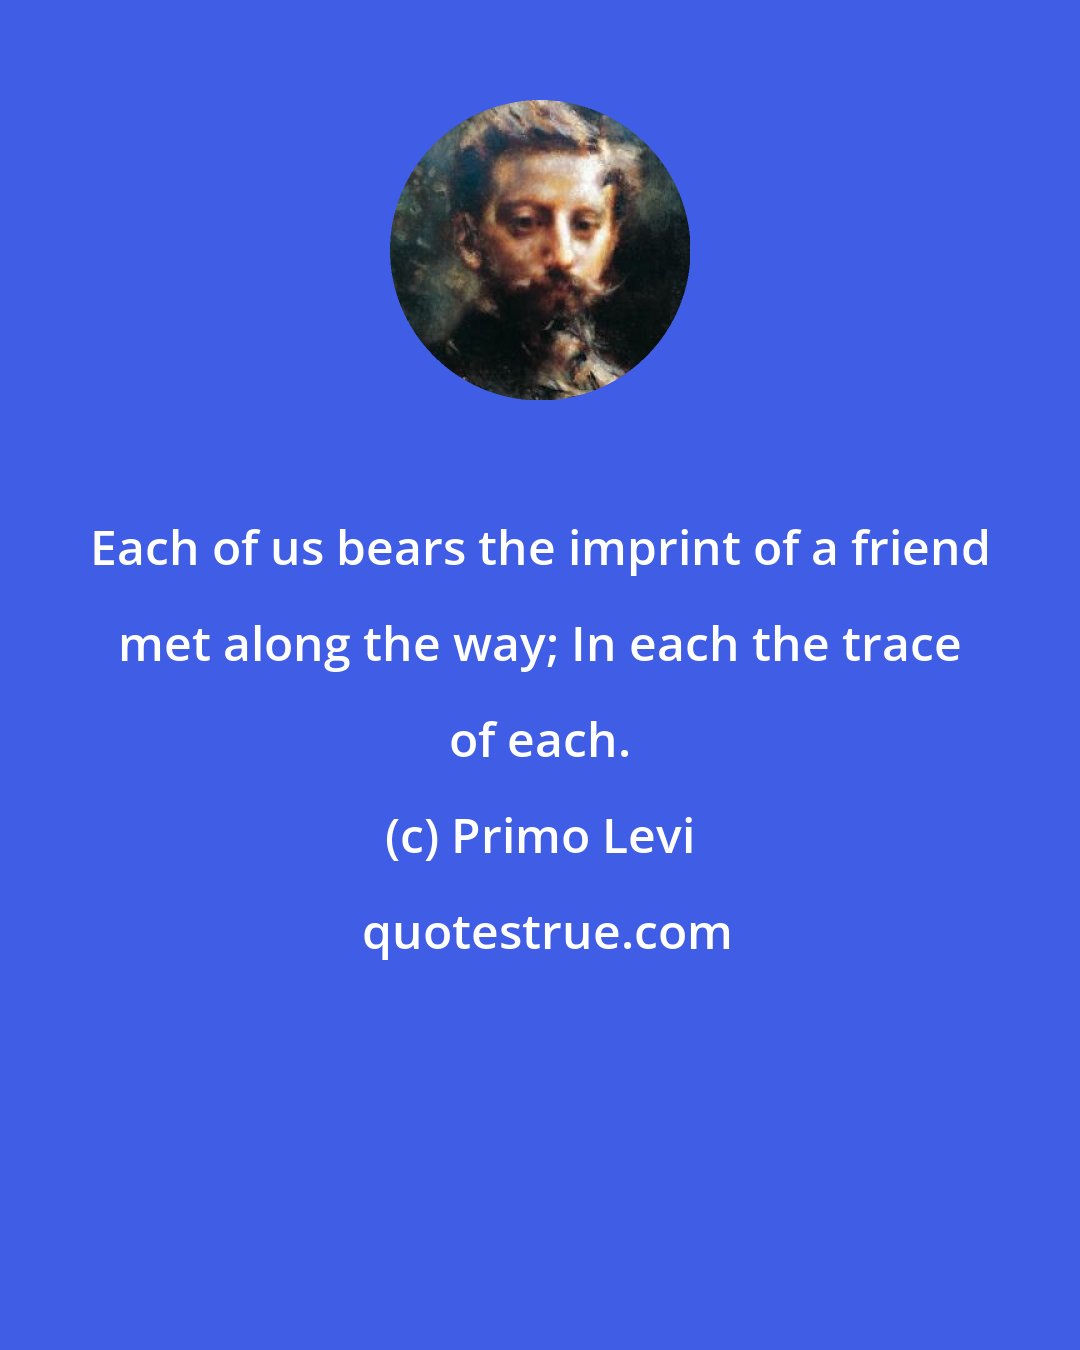 Primo Levi: Each of us bears the imprint of a friend met along the way; In each the trace of each.